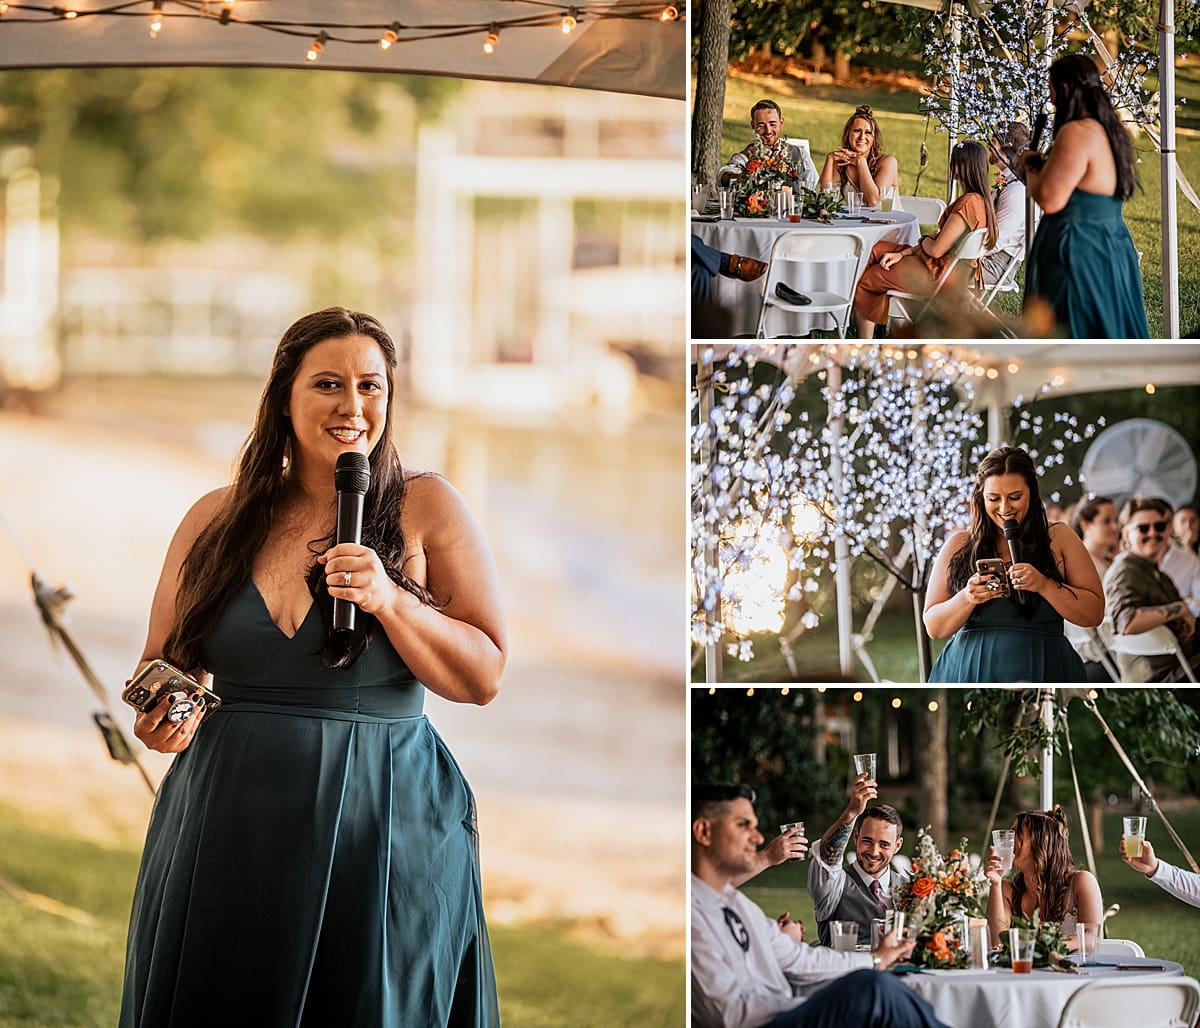 wedding speeches at lakeside tented wedding reception